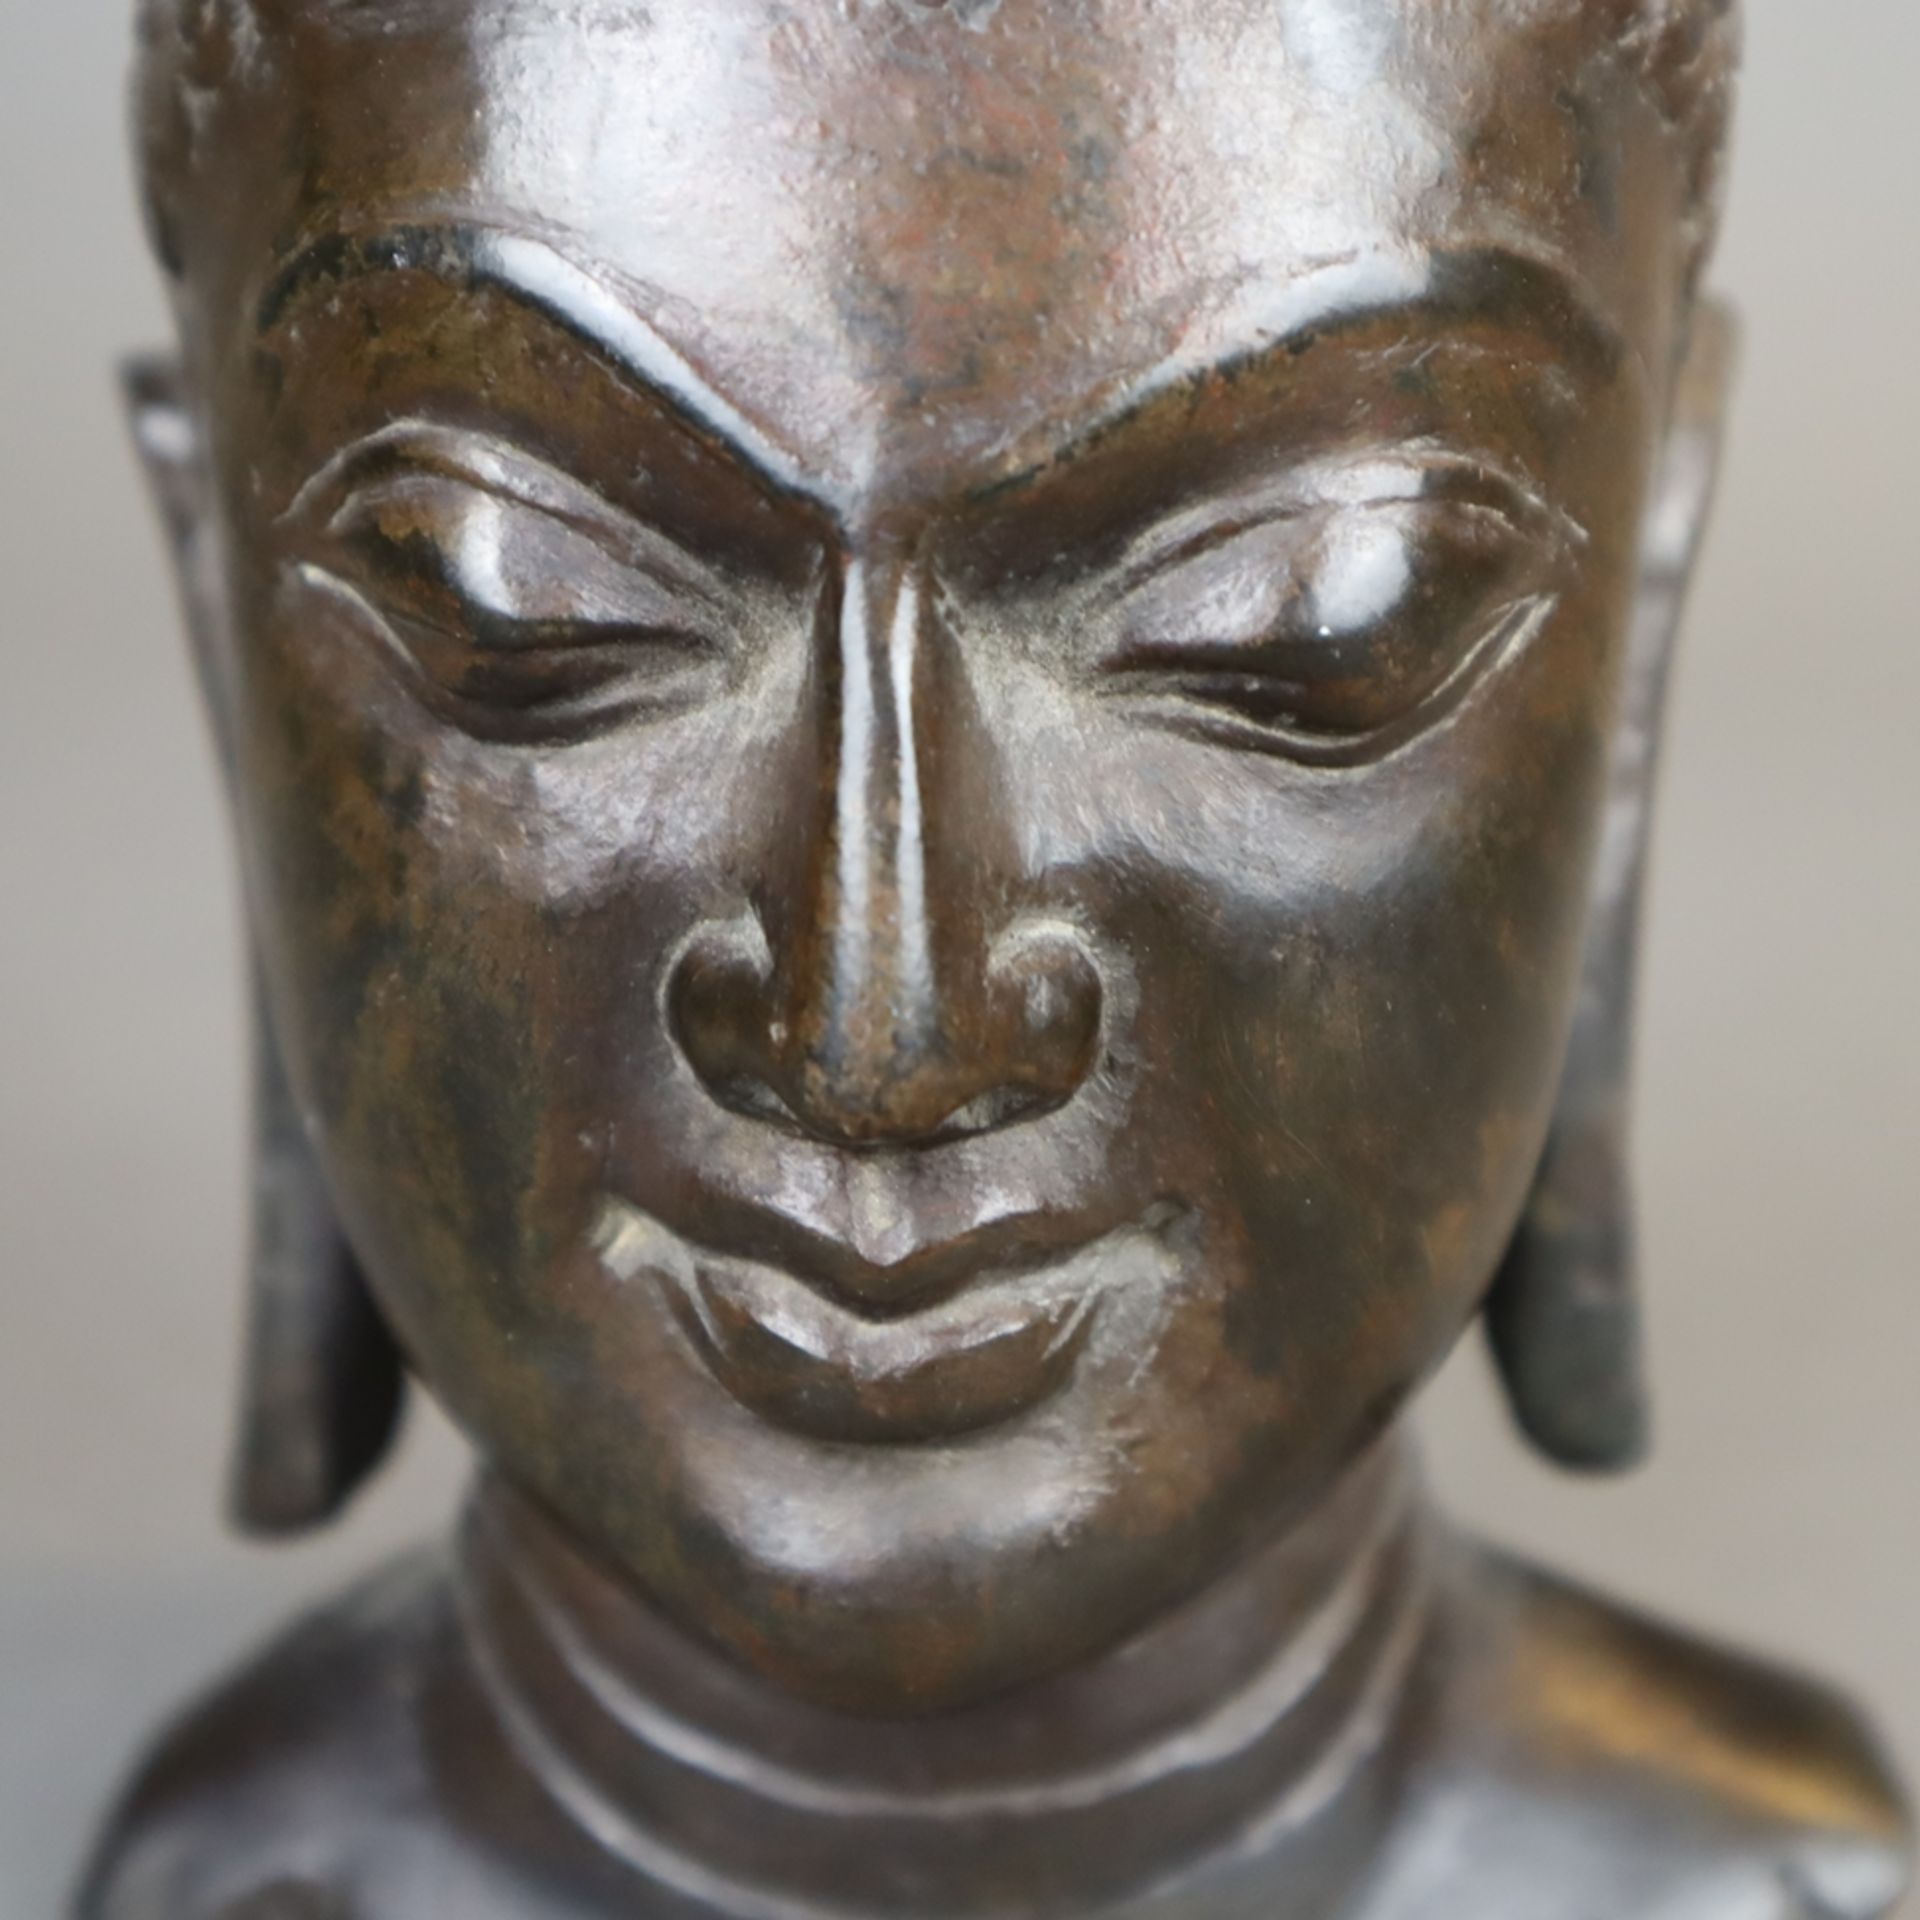 Small Buddha head - stone sculpture, India, fine facial features with meditatively half-closed eyes - Image 2 of 5